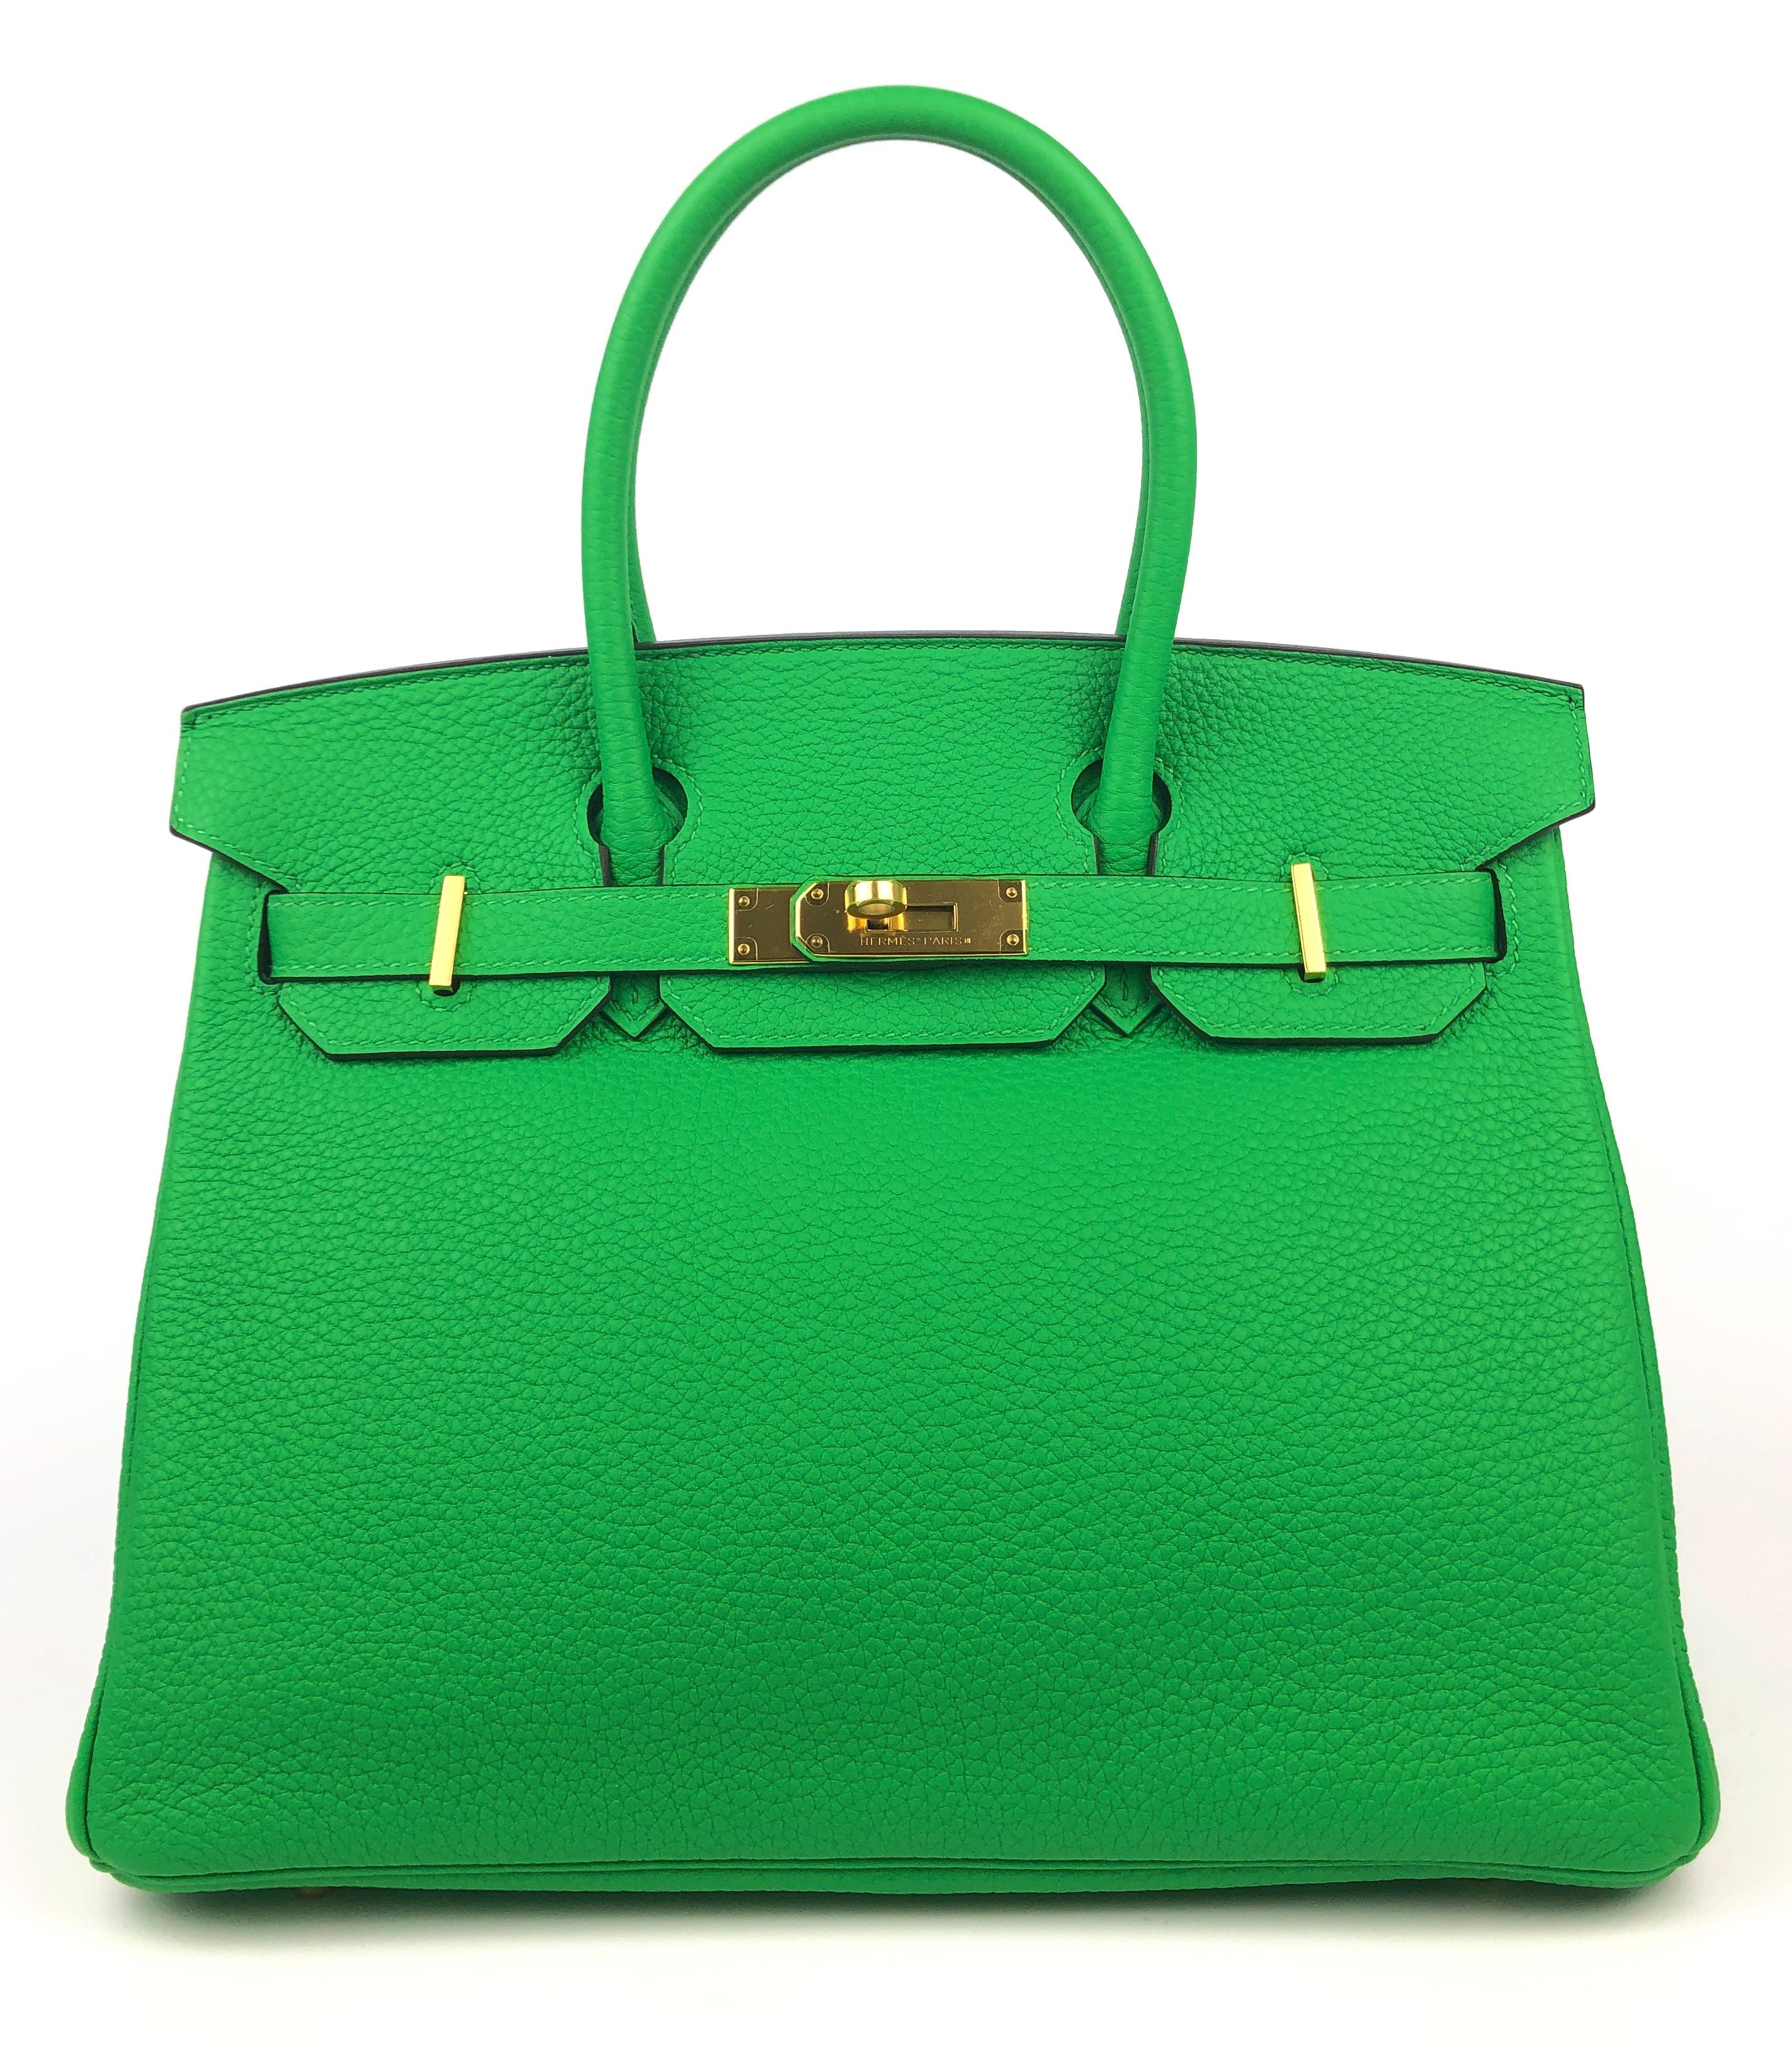 Stunning Almost Like New Hermes Birkin 30 Bamboo Green Gold Hardware. Pristine Almost Like New Condition with Plastic on Hardware, Perfect corners and structure. 

Shop with Confidence from Lux Addicts. Authenticity Guaranteed!